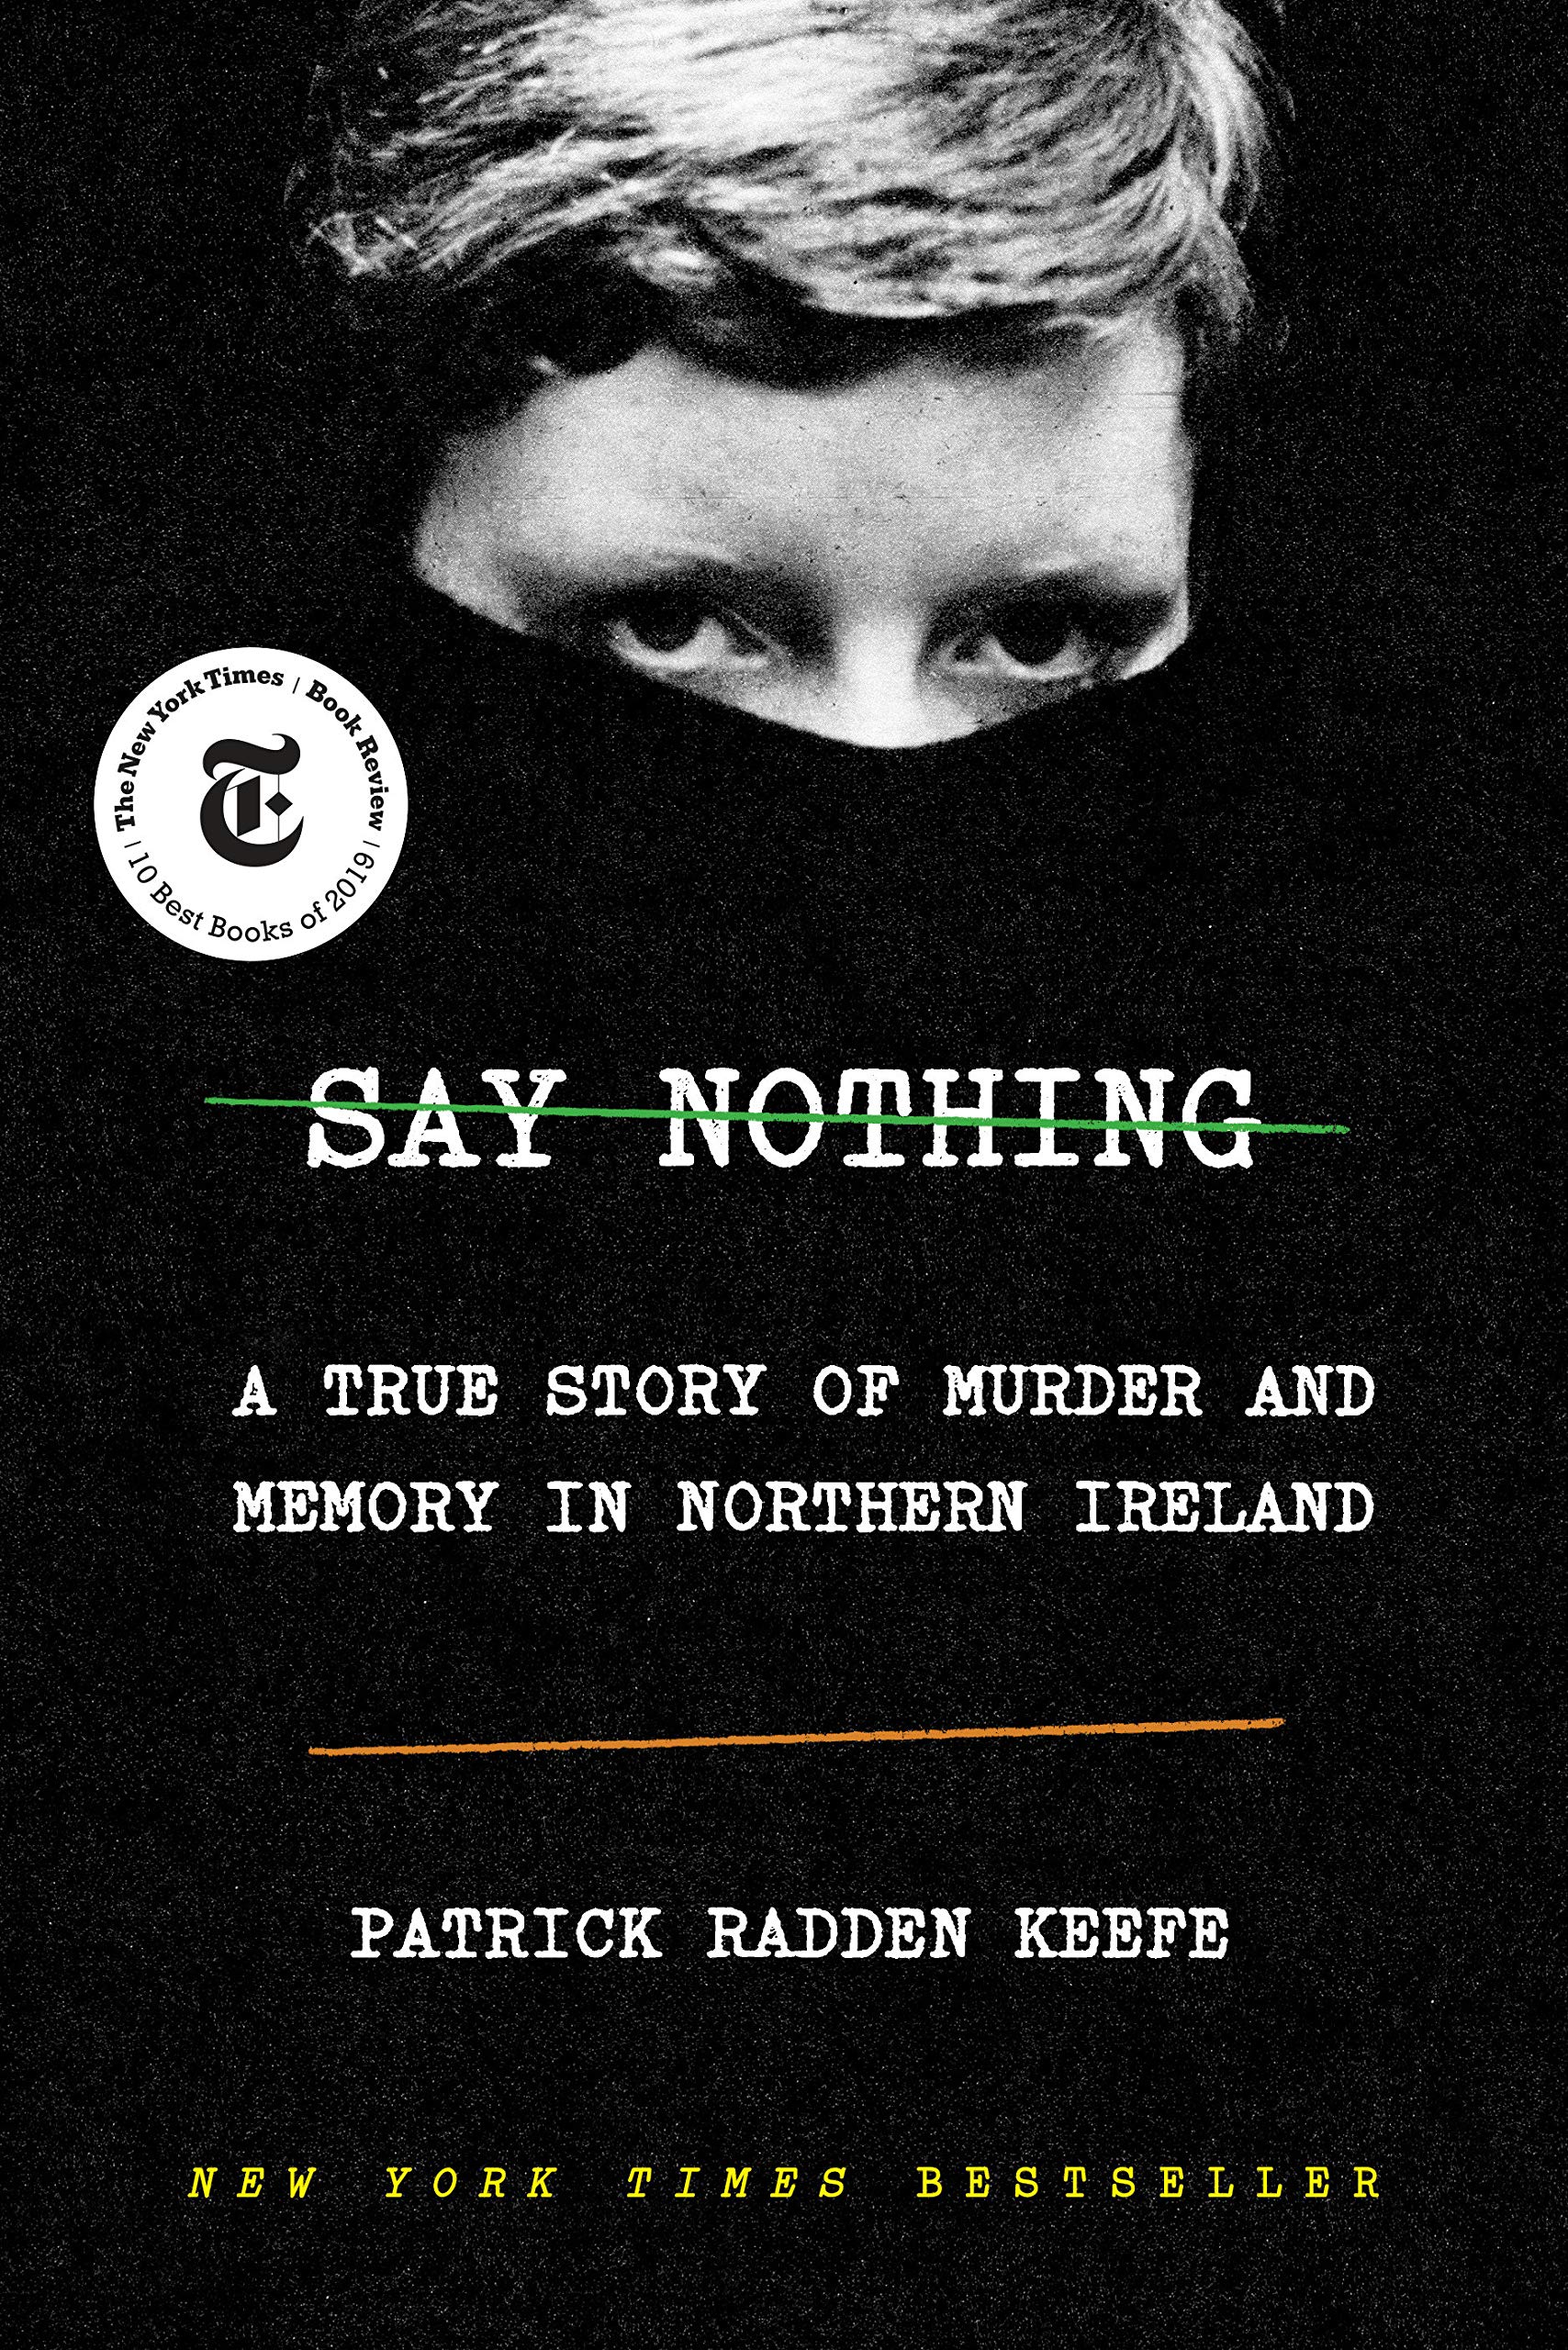 Cover of "Say Nothing" by Patrick Radden Keefe